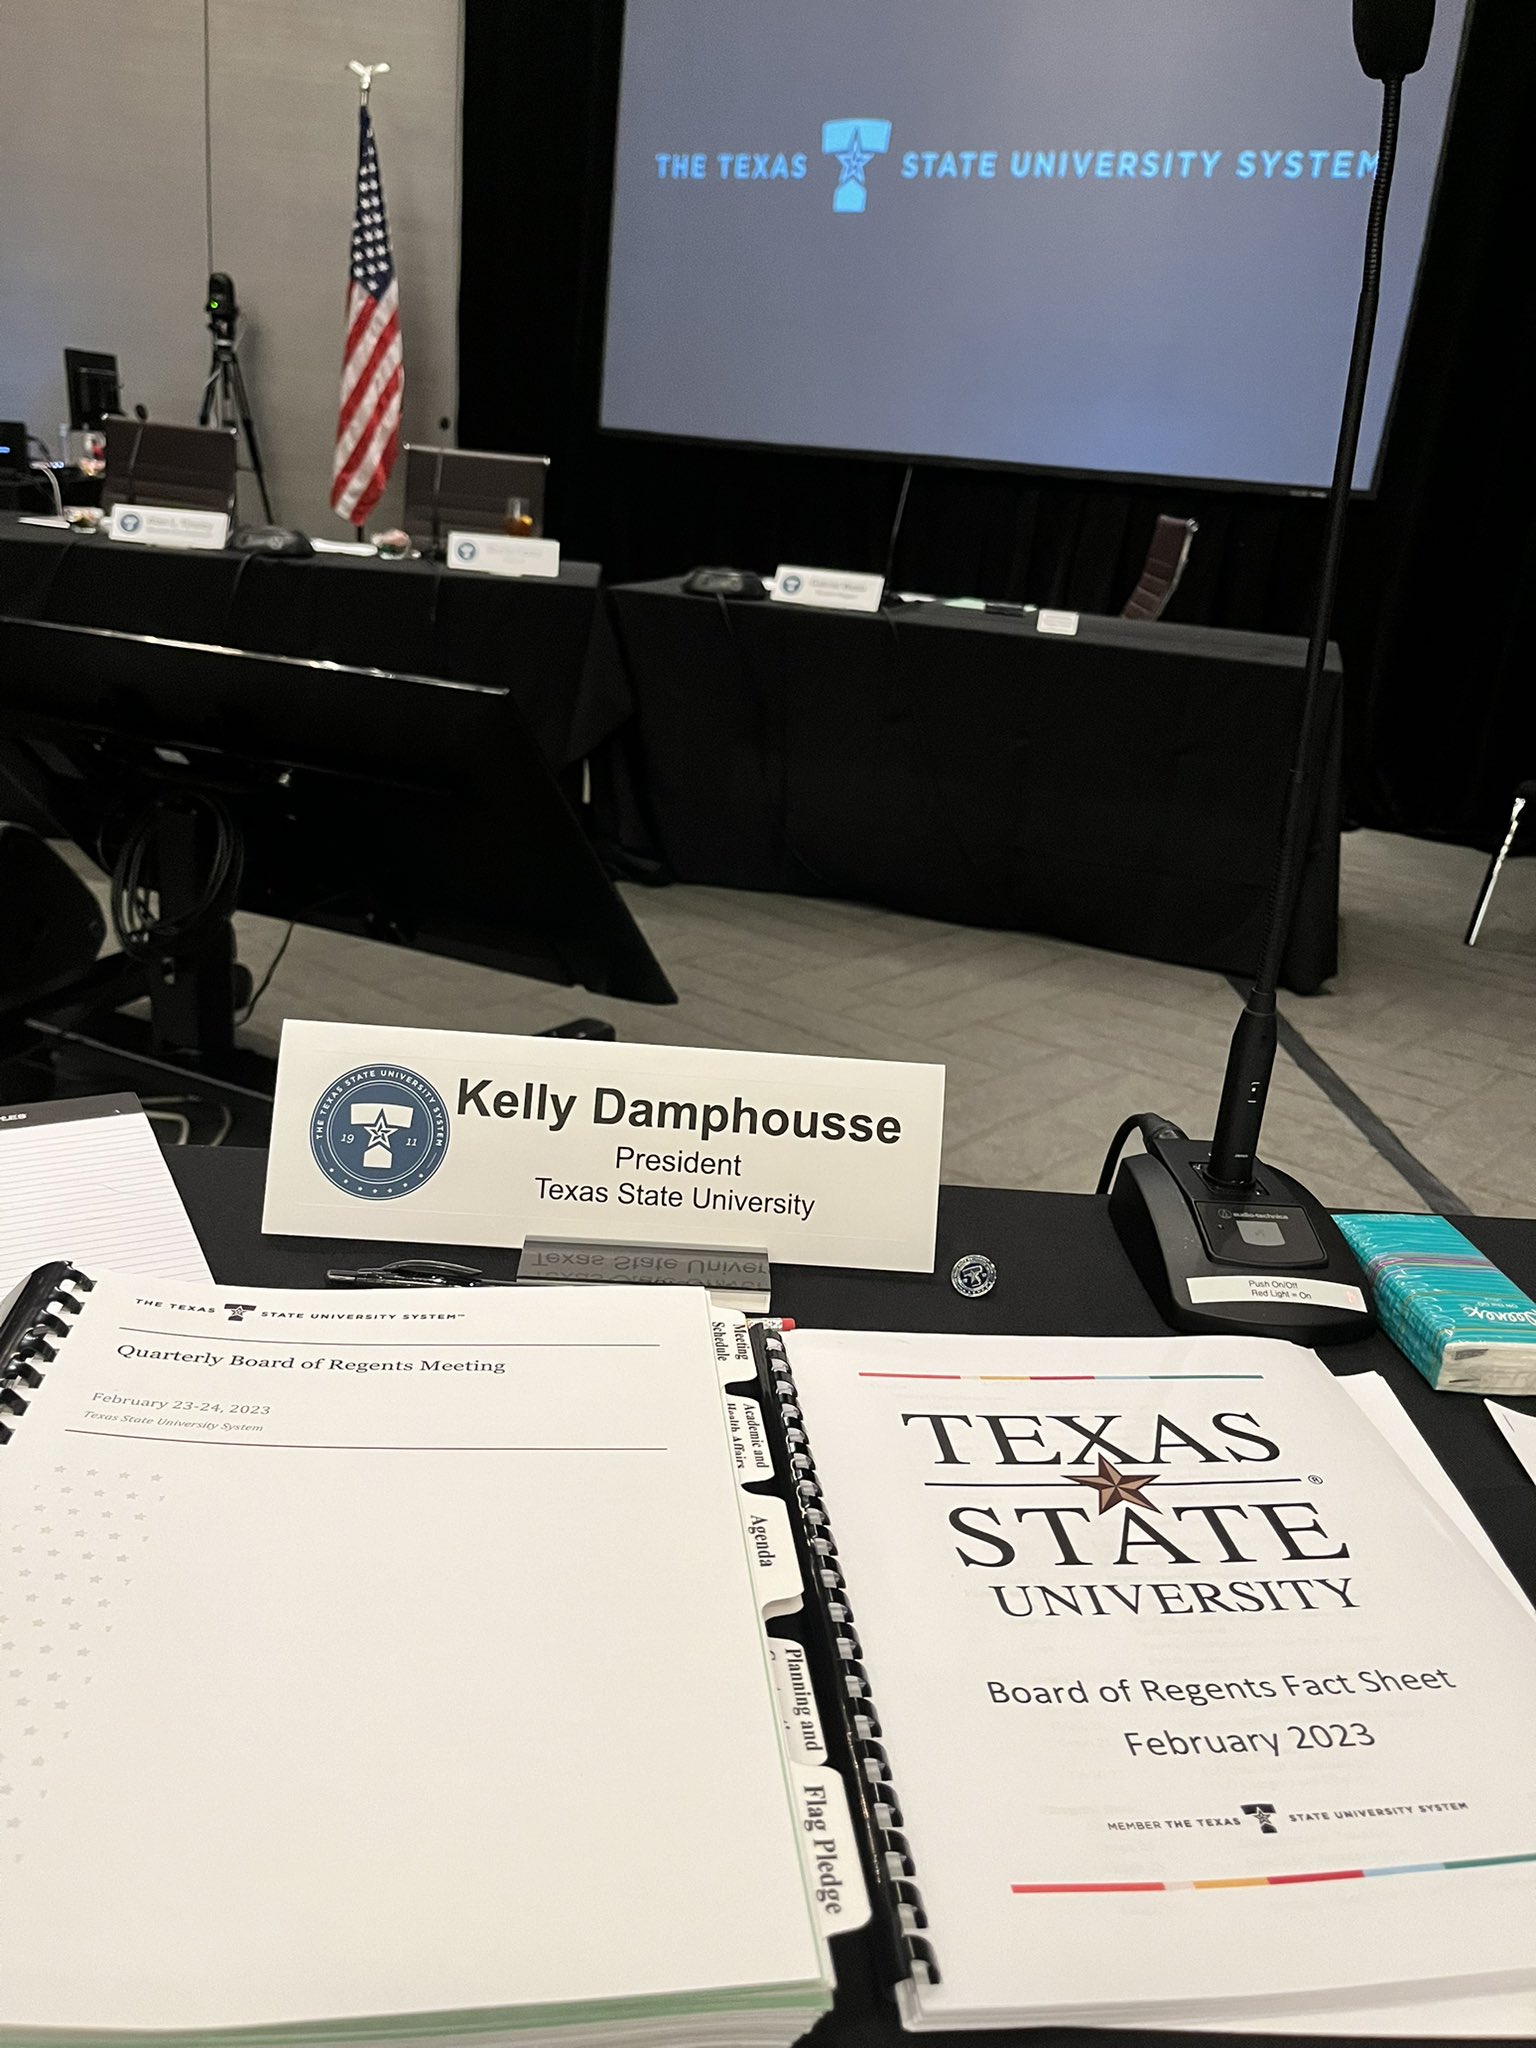 𝙺𝚎𝚕𝚕𝚢 𝙳𝚊𝚖𝚙𝚑𝚘𝚞𝚜𝚜𝚎 on X: Another great meeting of the  @TXStateUnivSyst Board of Trustees in